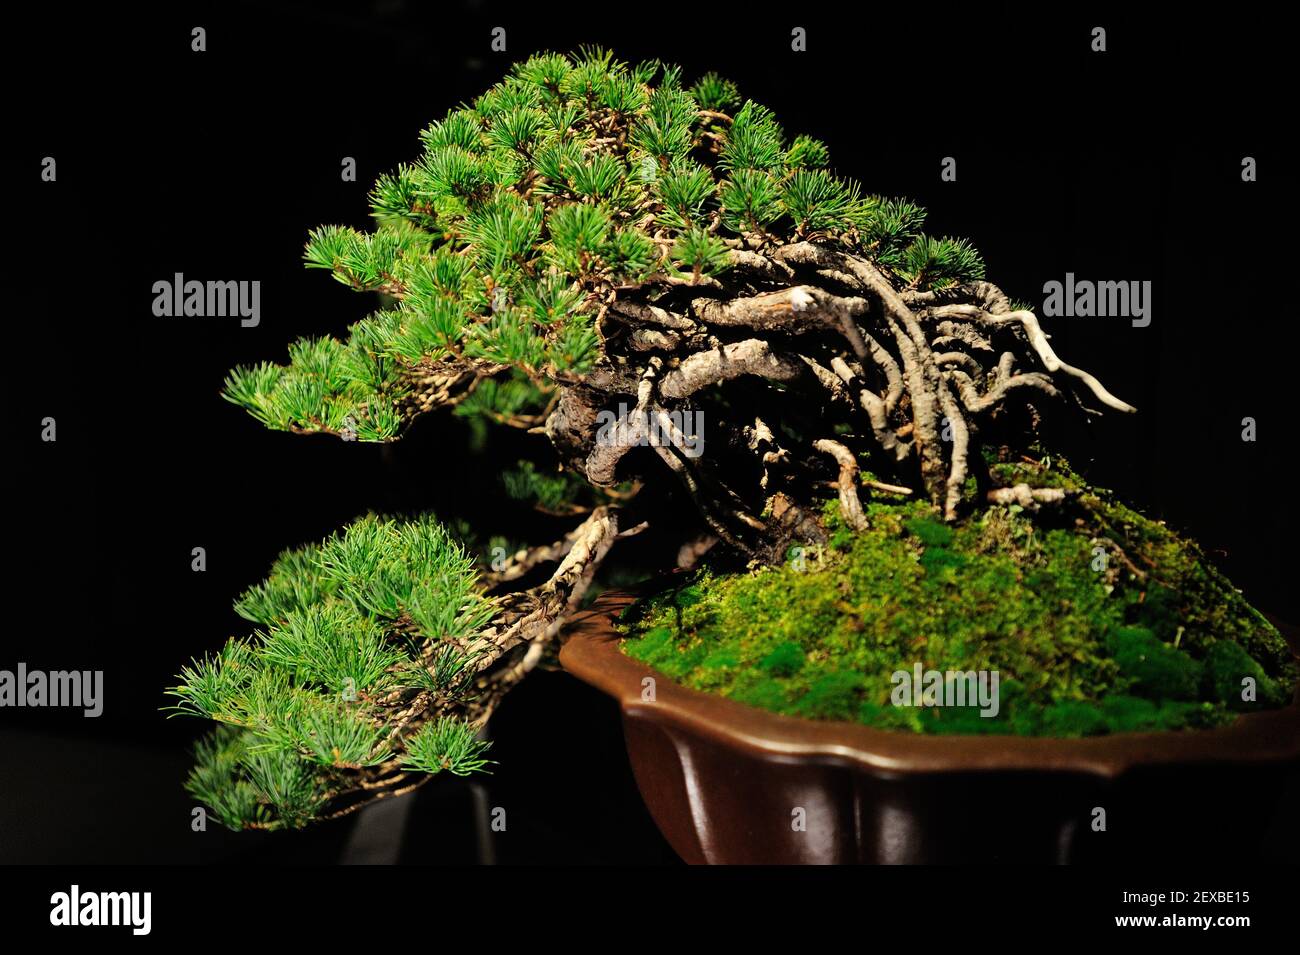 The Artisans Cup, held at the Portland Art Museum in Portland, Ore., from September 25-27, 2015, celebrates the growing art of American Bonsai and all those devoted to excellence in the craft. A 40-50-year-old Japanese White Pine from Konnor Jenson is pictured at the exhibit on September 26, 2015. (Photo by Alex Milan Tracy) *** Please Use Credit from Credit Field *** Stock Photo